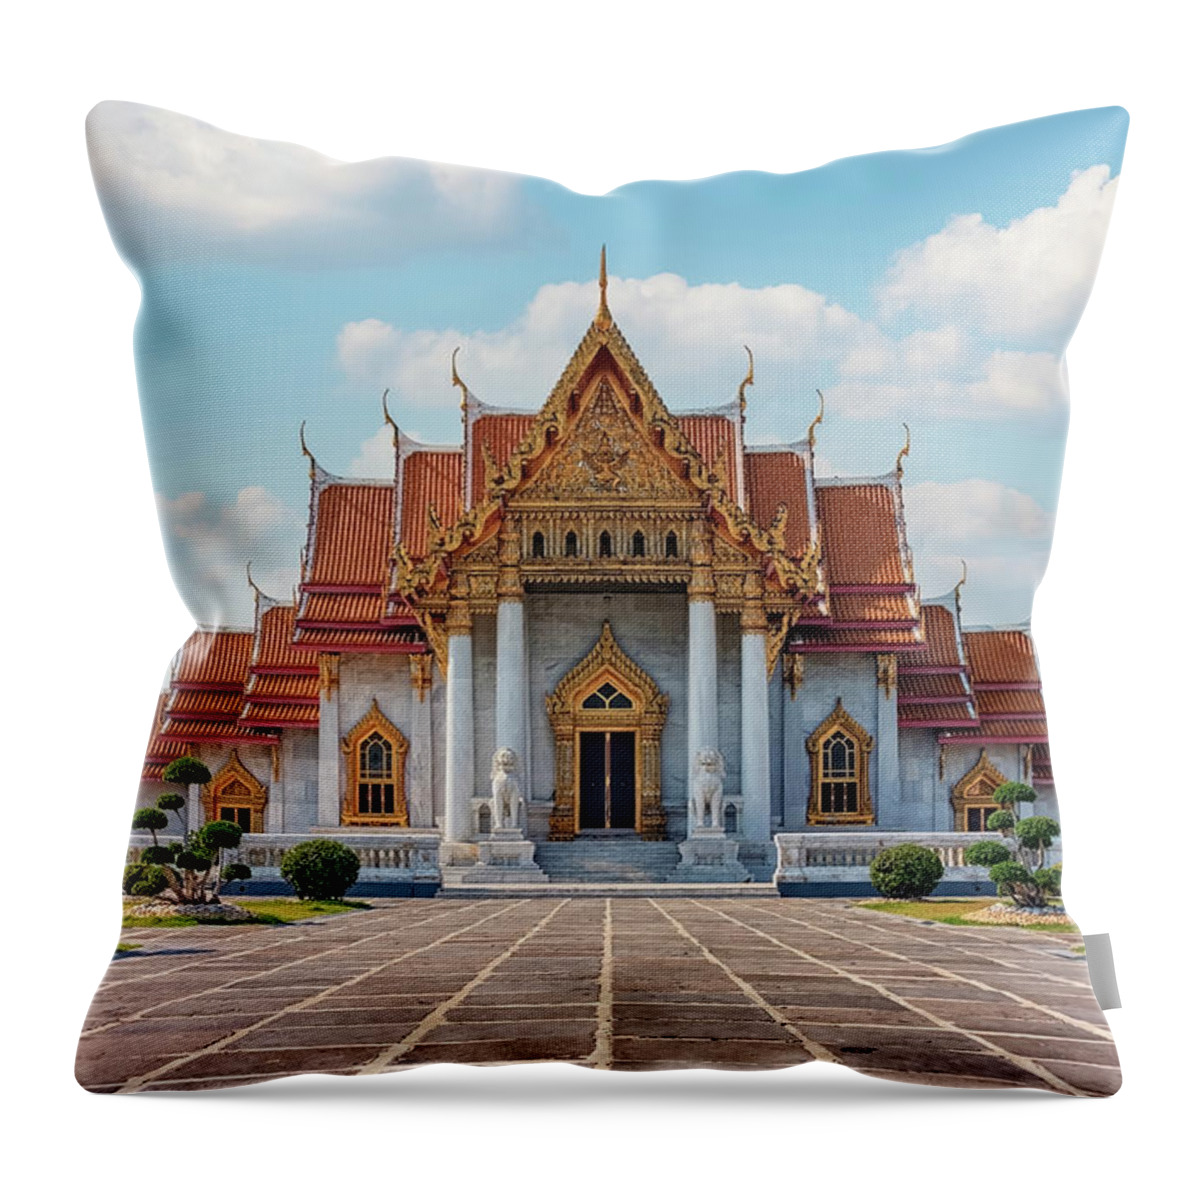 Ancient Throw Pillow featuring the photograph Wat Benchamabophit Temple by Manjik Pictures